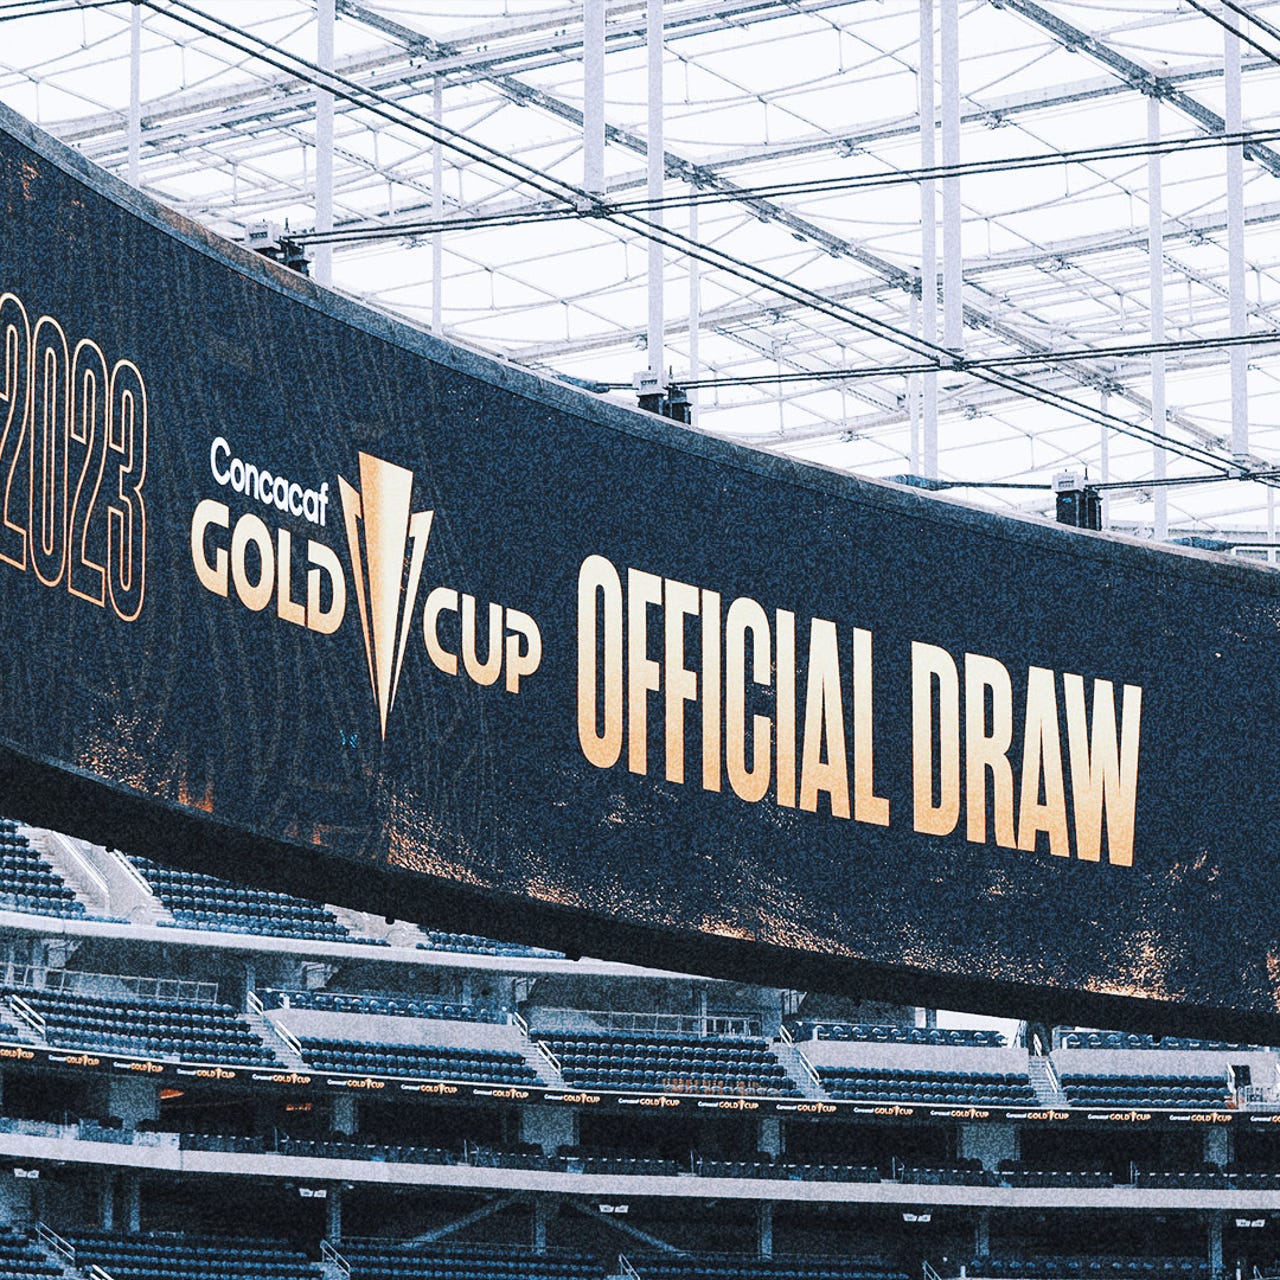 2023 CONCACAF Gold Cup quarterfinal: Scouting Canada - Stars and Stripes FC